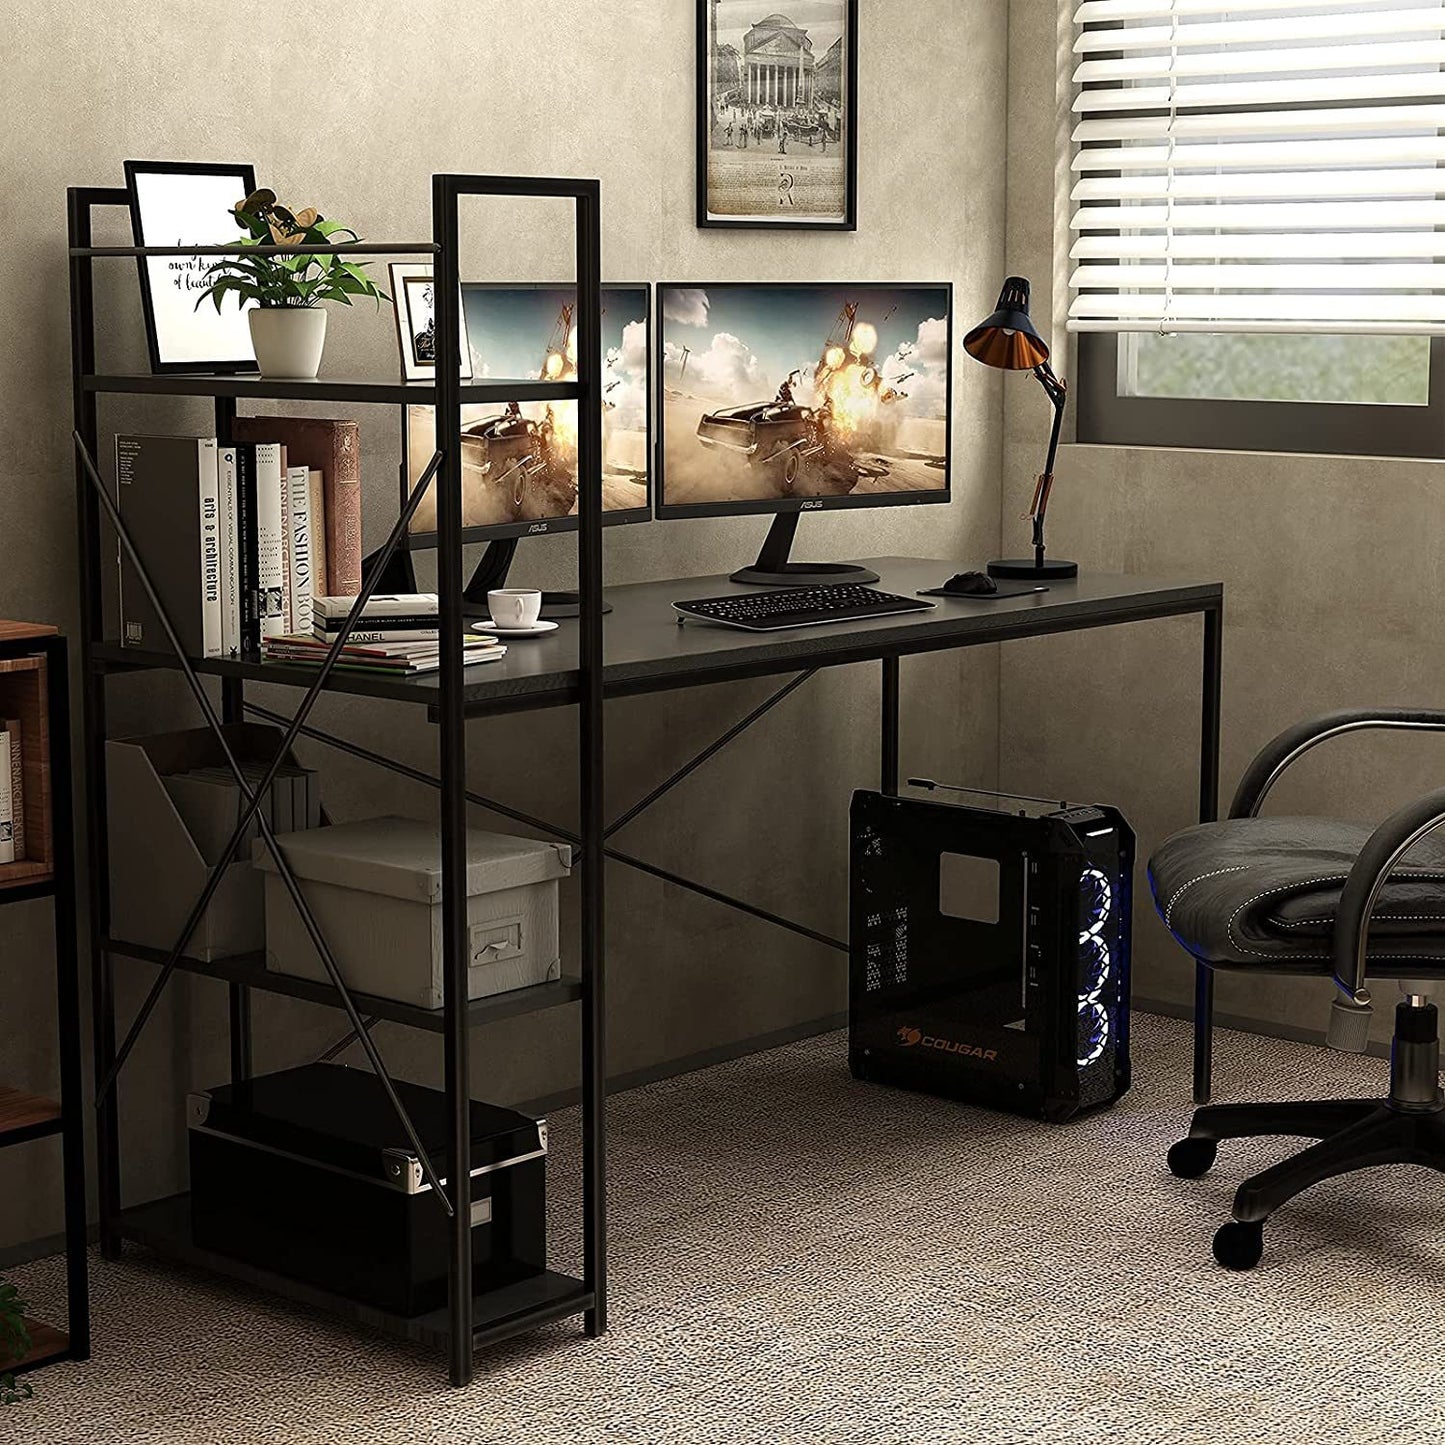 Computer Desk 48" with Storage Shelves Student Study Writing Table for Home Office Modern Simple Style PC Laptop Table Rustic Black Metal Frame Black